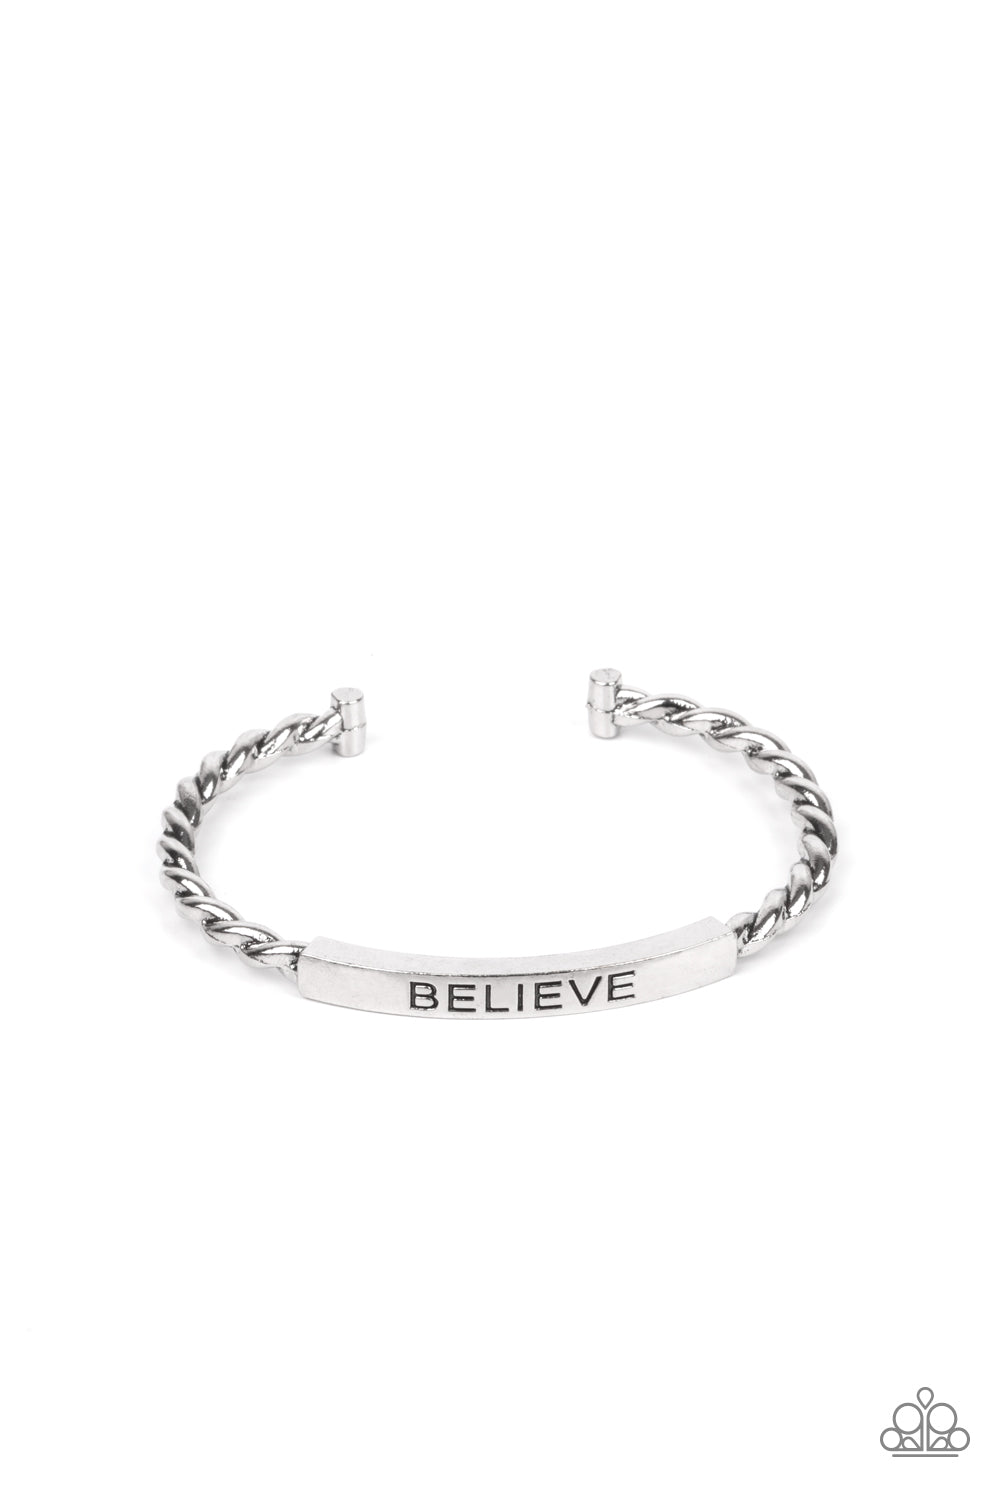 Paparazzi Accessories - Keep Calm and Believe #B579 - Silver Bracelet